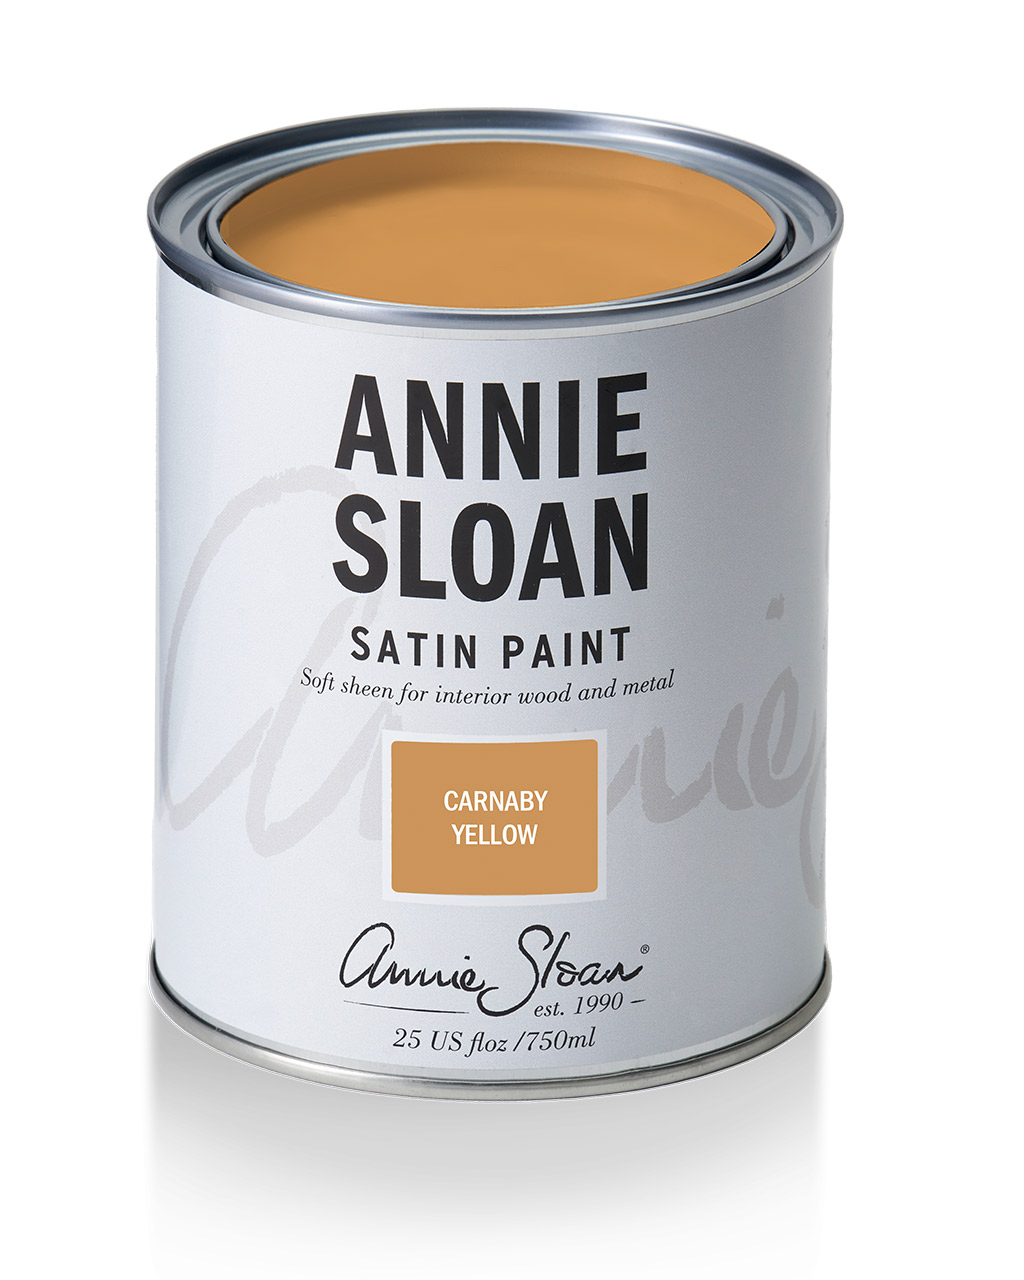 Product shot of Annie Sloan Satin Paint tin in Carnaby Yellow